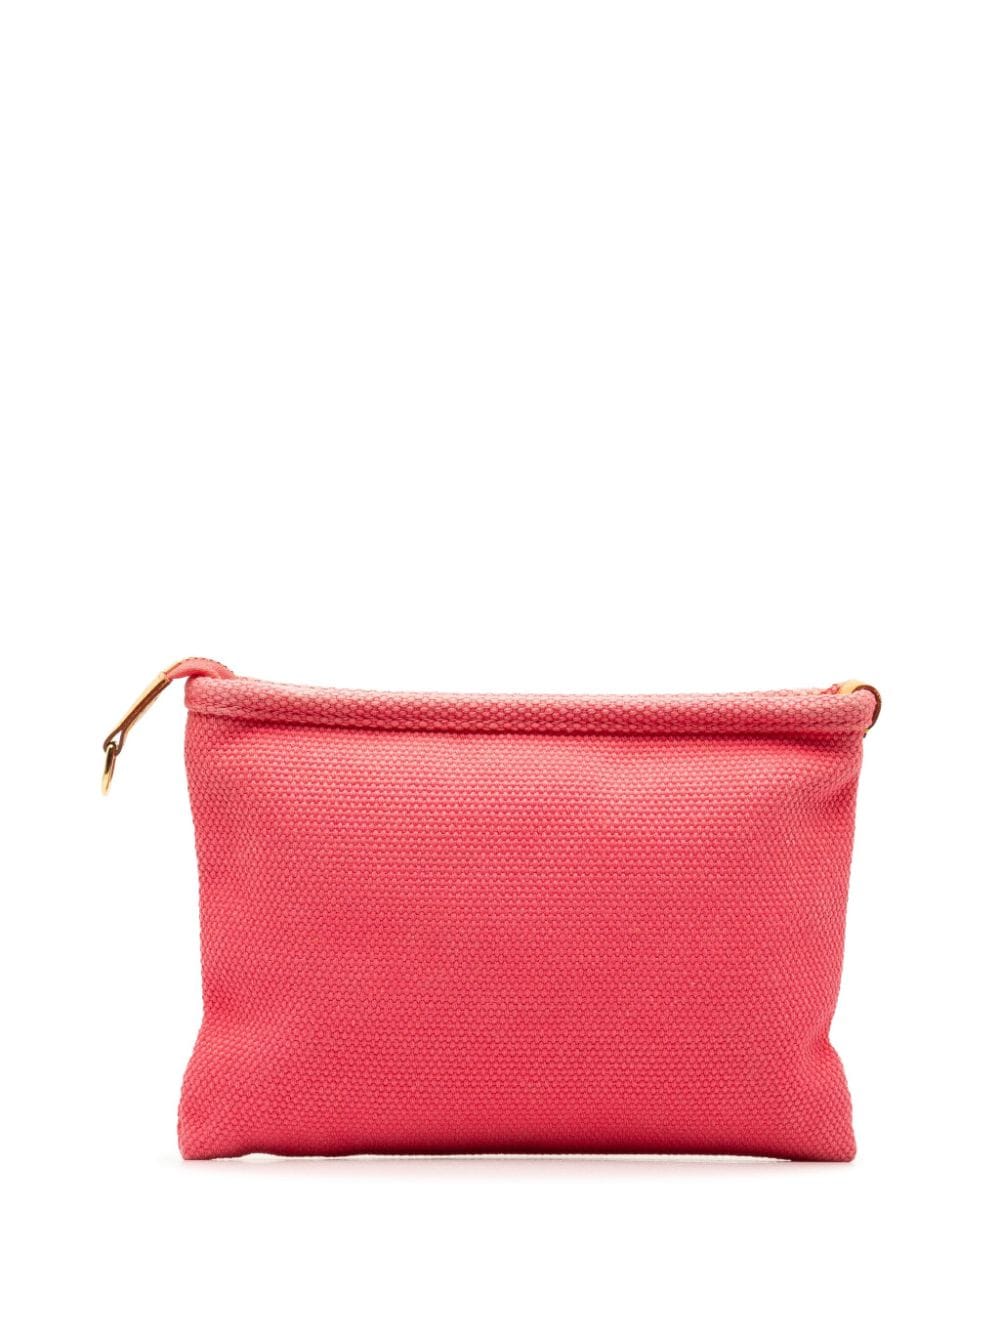 Pre-owned Louis Vuitton 2006 Antigua Pochette Pm Pouch In Pink